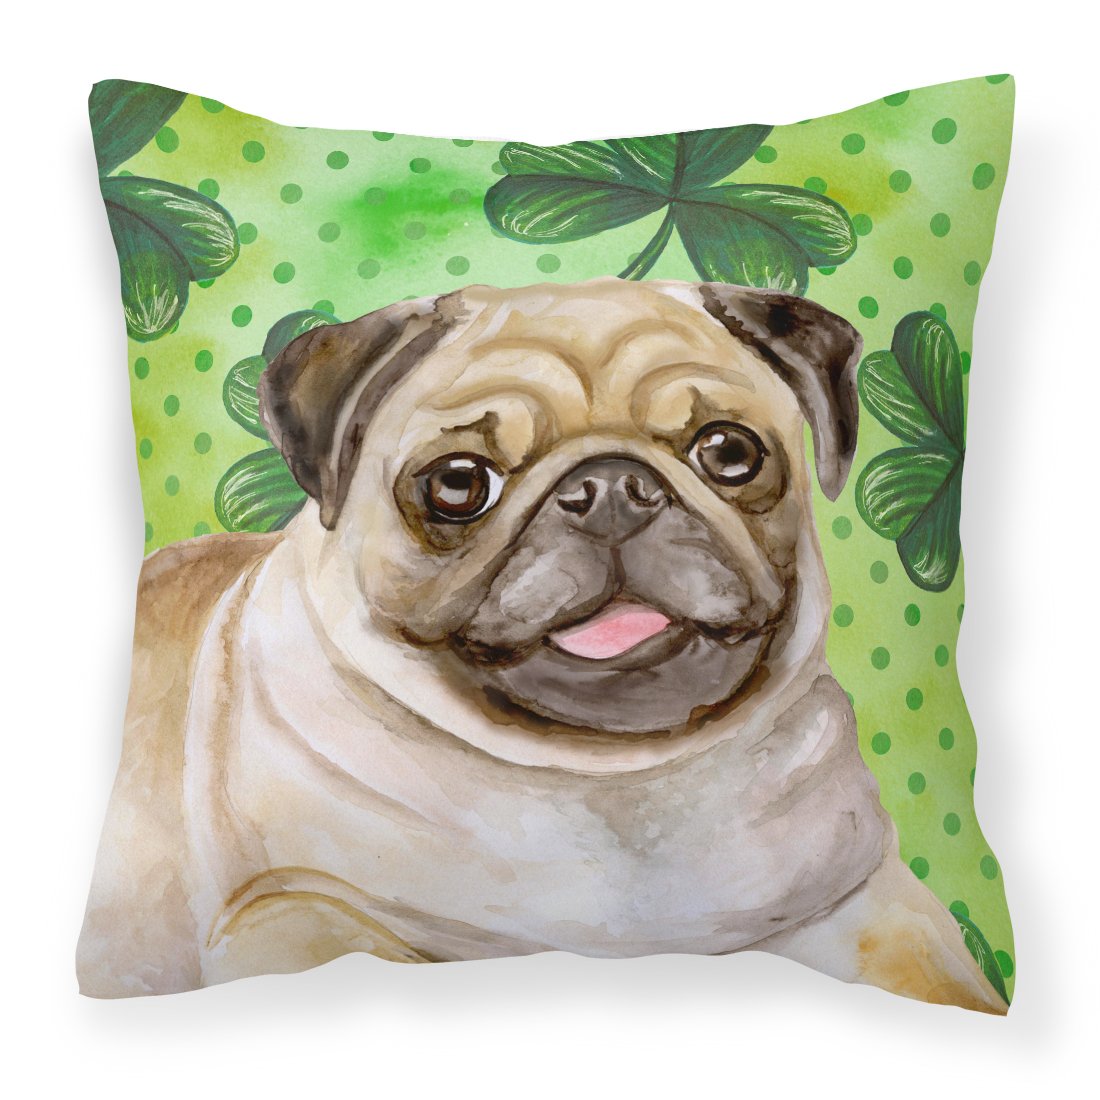 Fawn Pug St Patrick's Fabric Decorative Pillow BB9892PW1818 by Caroline's Treasures